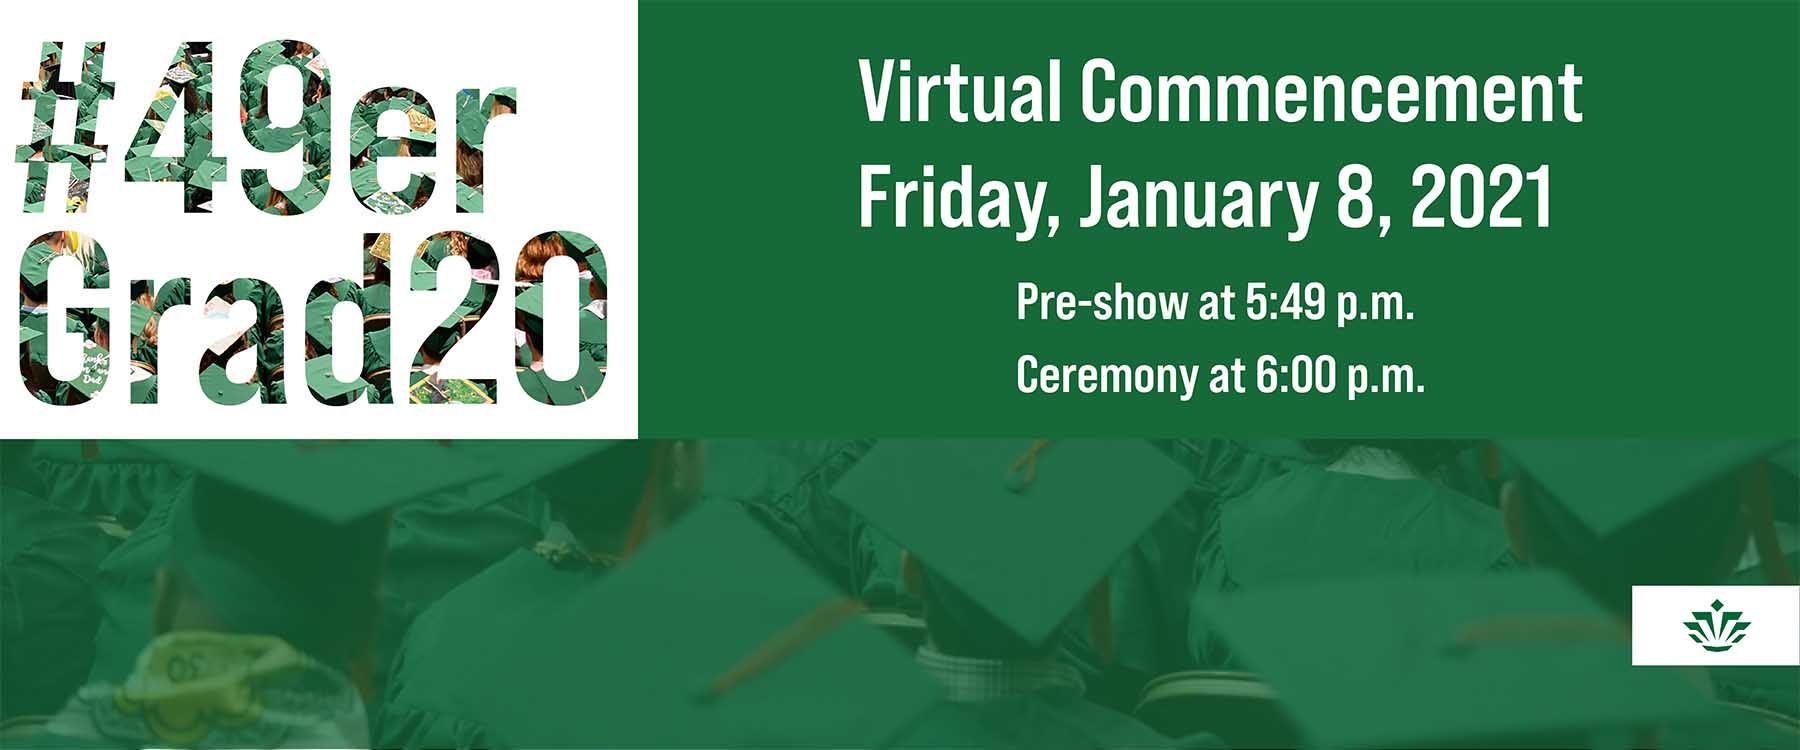 9,004 to receive degrees during virtual Commencement